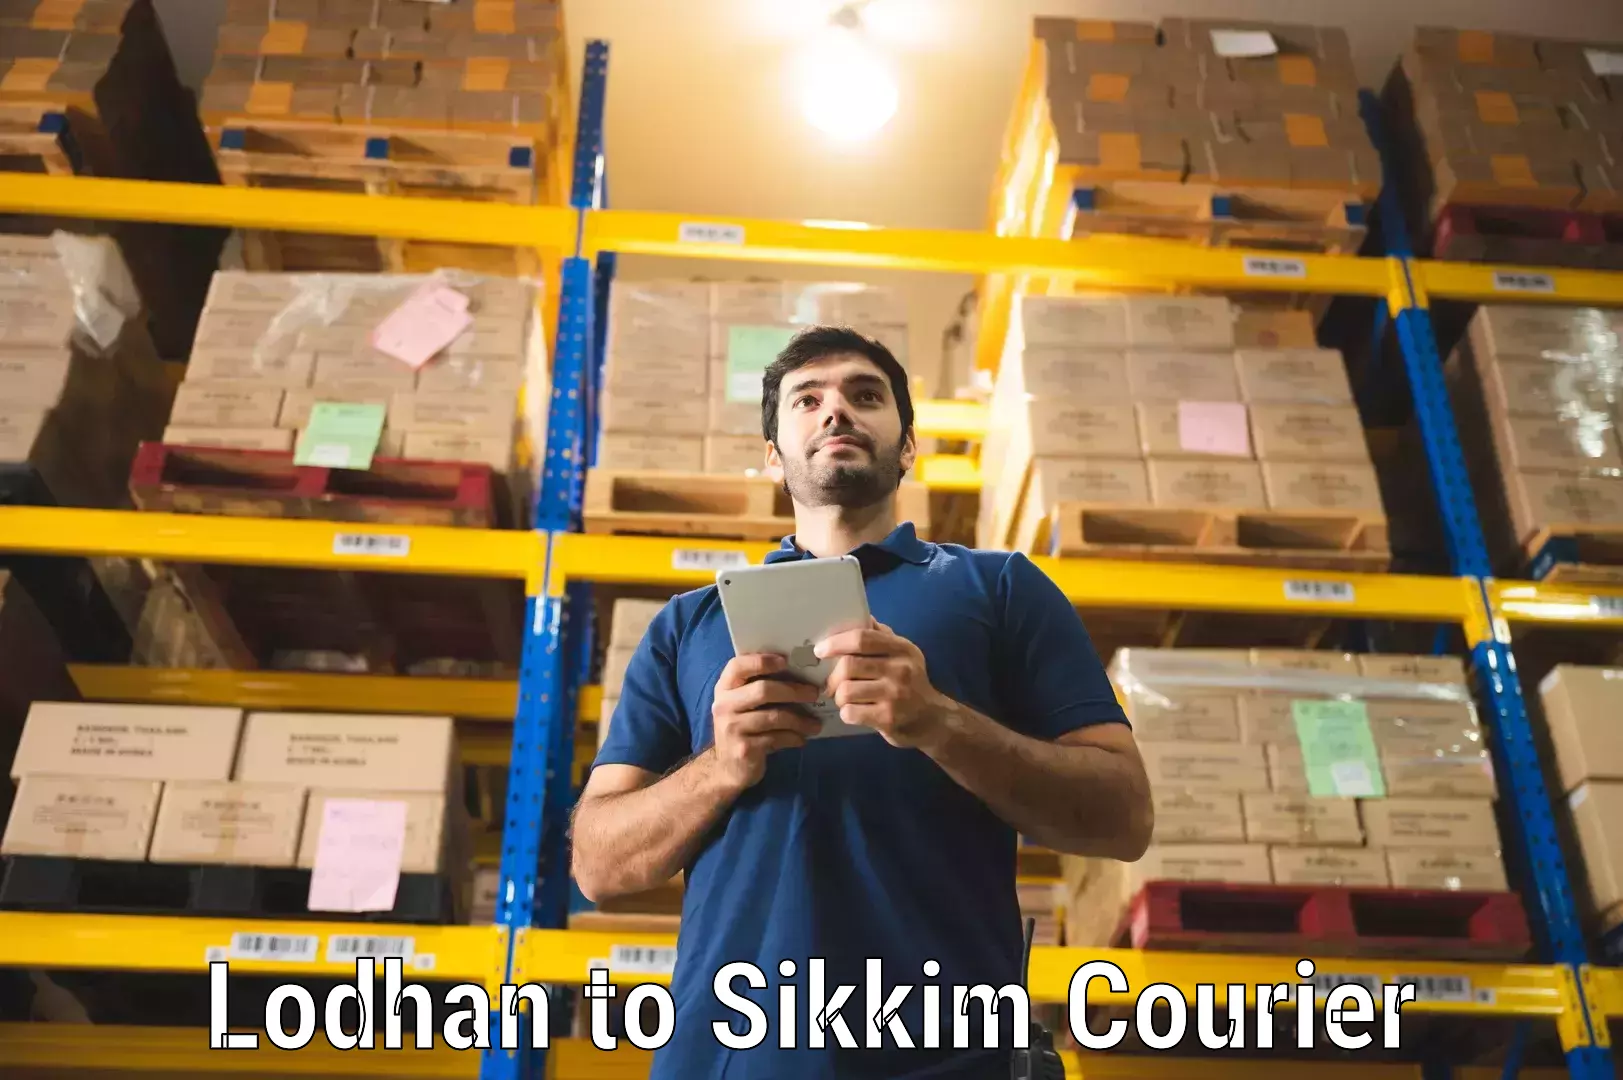 Courier service booking Lodhan to Sikkim